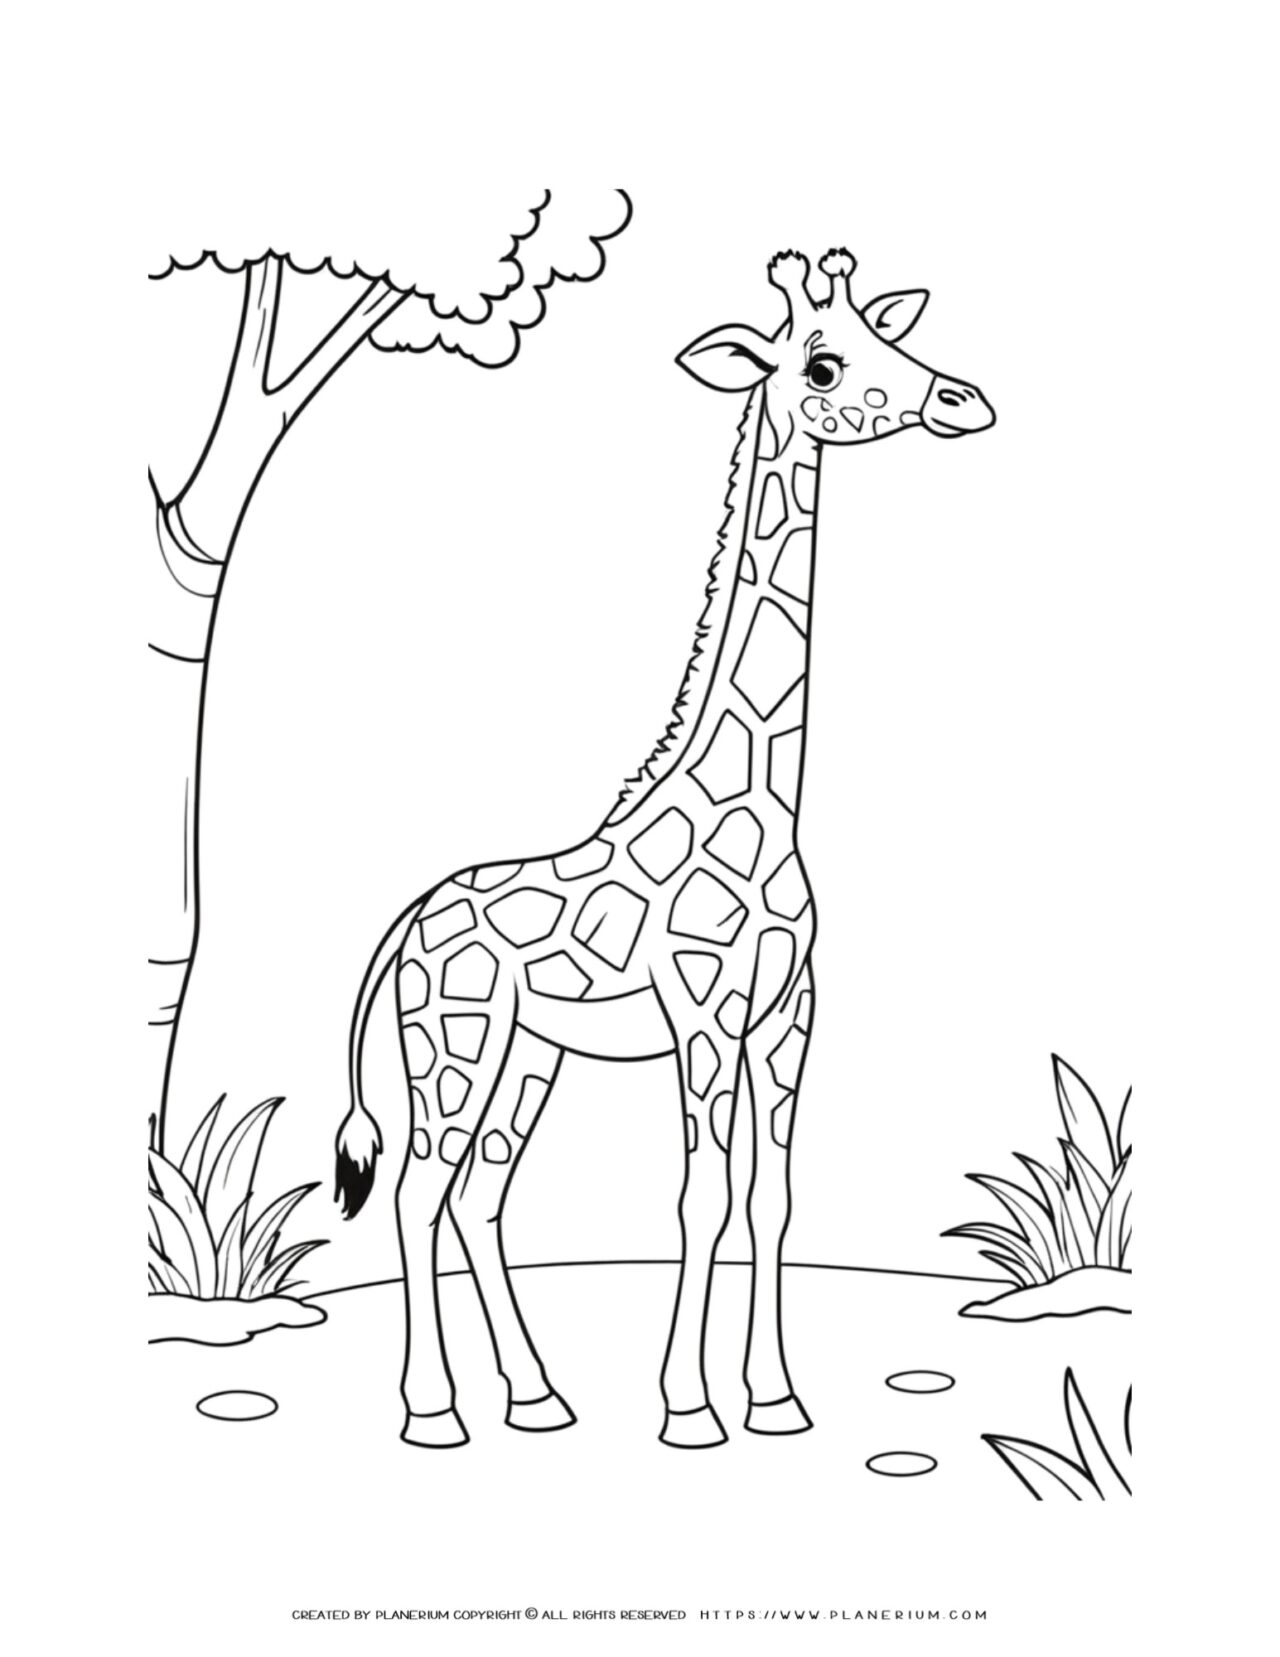 giraffe-side-view-in-nature-coloring-page-for-kids